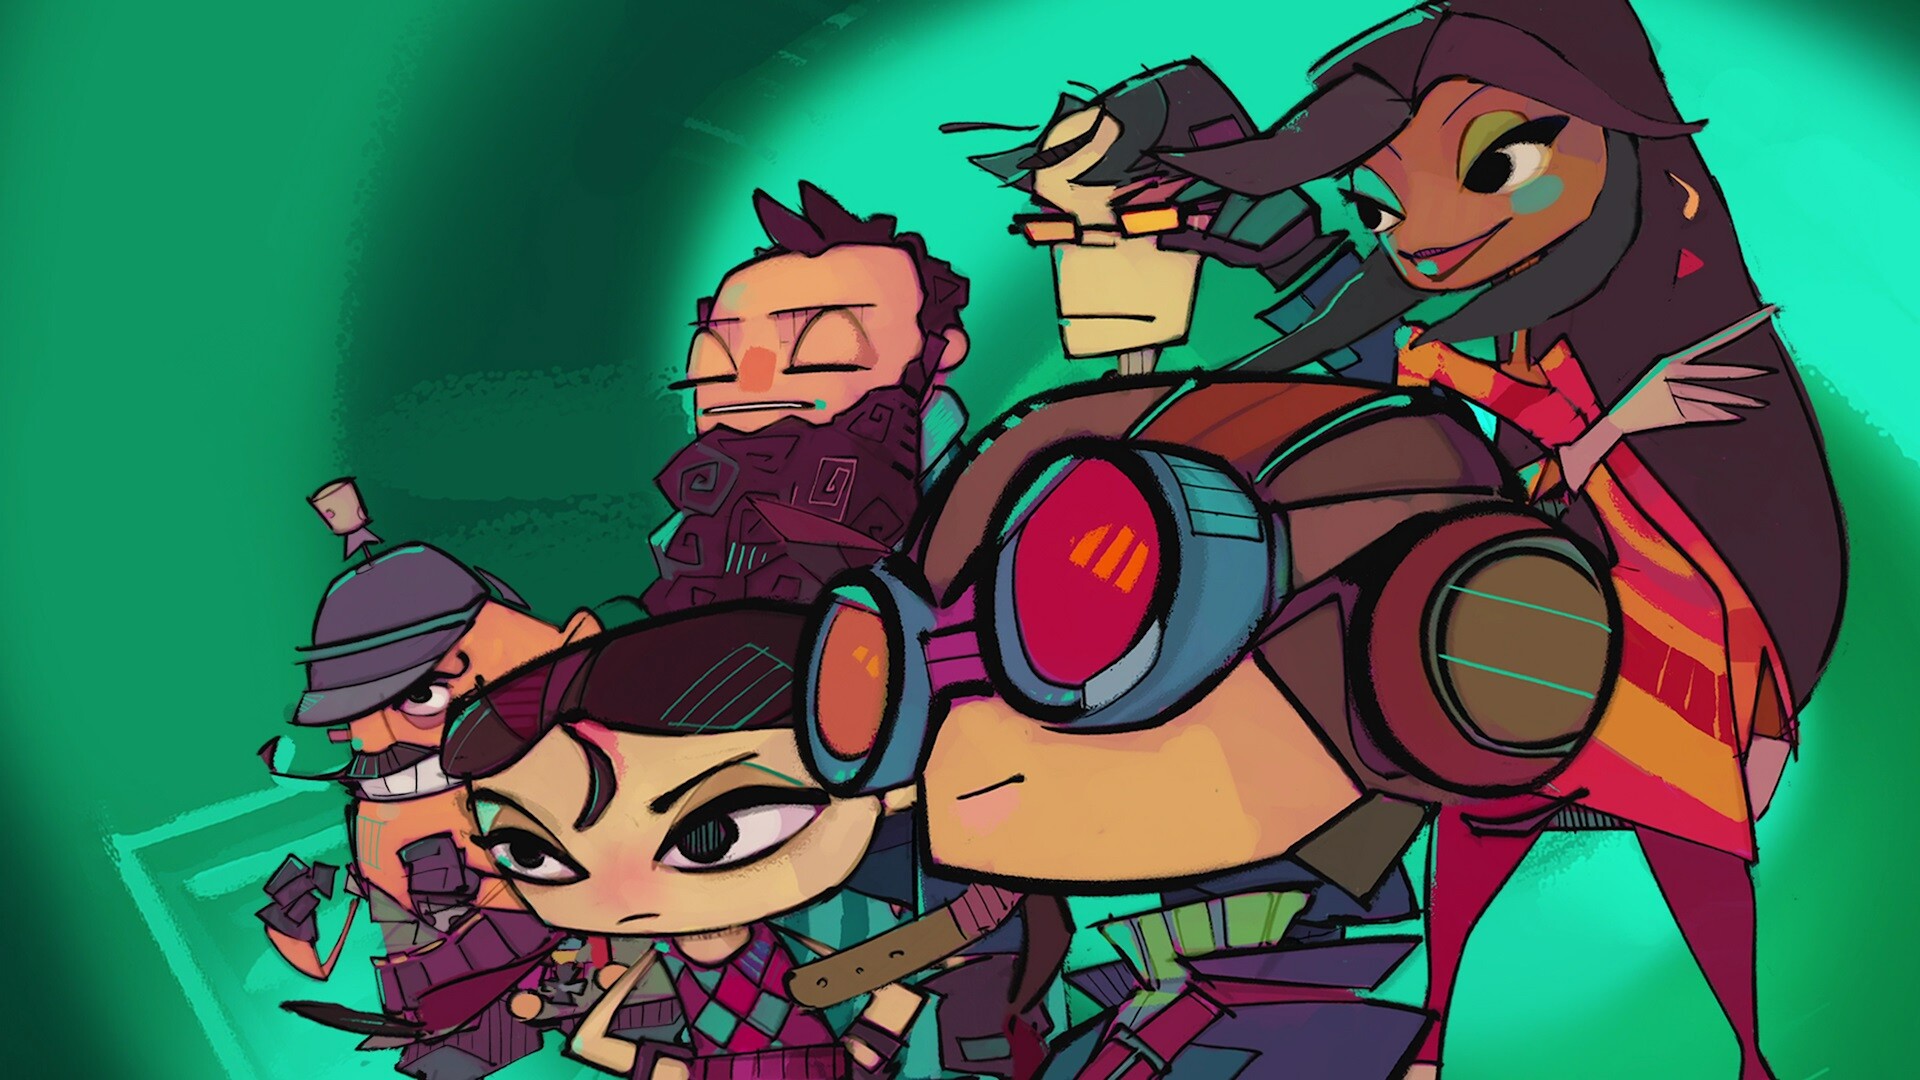 Psychonauts 2: A platform game available on the PS2, Xbox, and PC, Game art. 1920x1080 Full HD Background.